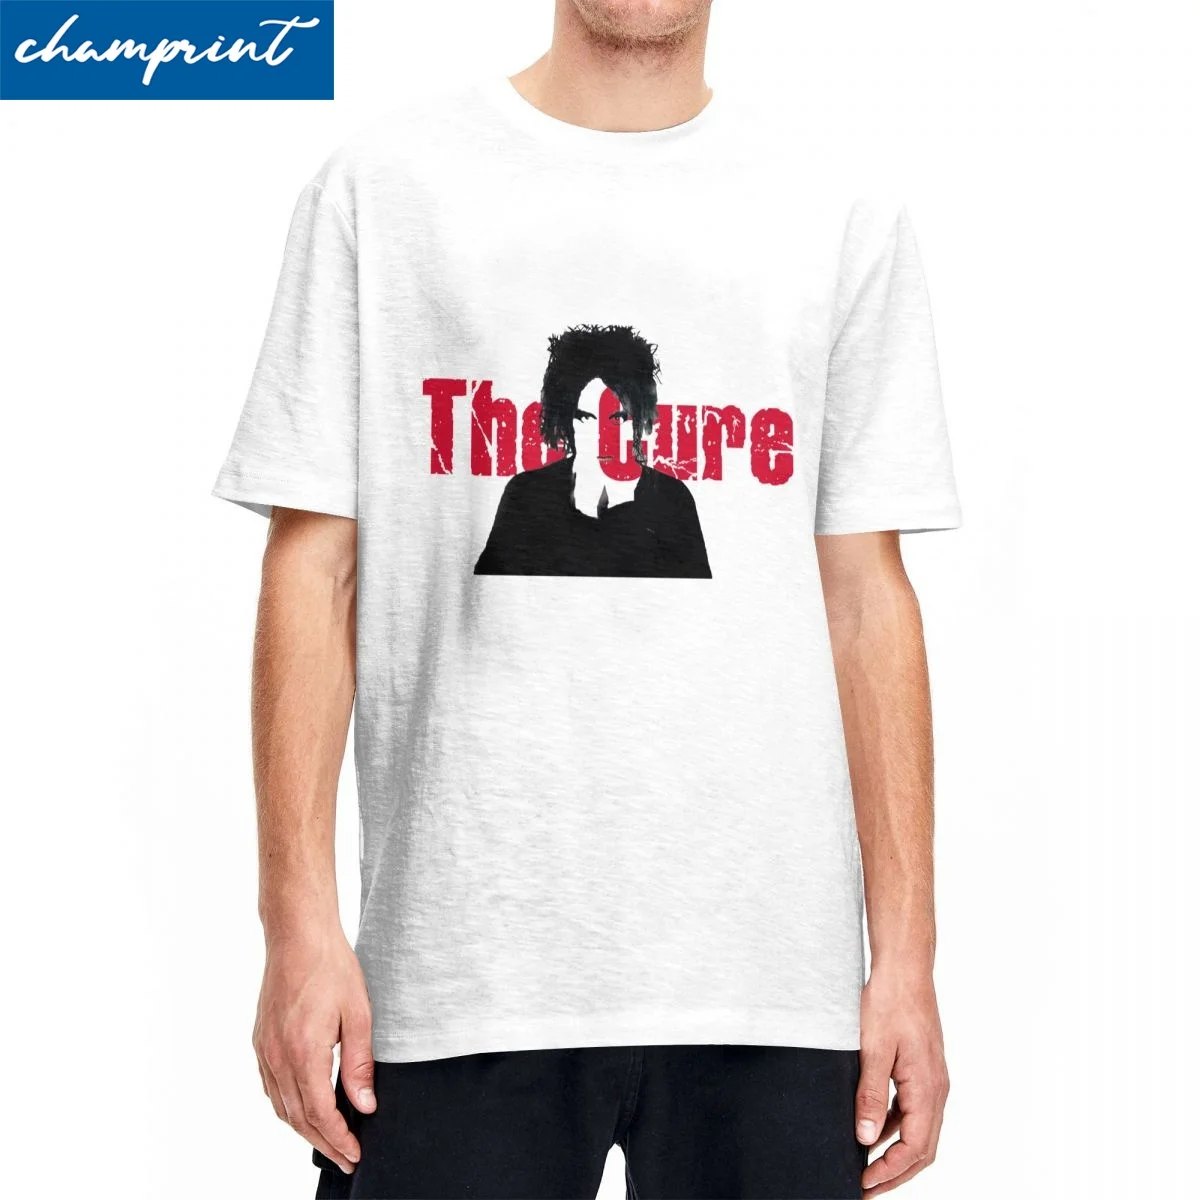 See Through T-Shirt for Men Women The Cure Vintage Cotton Tees Round Collar Short Sleeve T Shirt Party Clothing